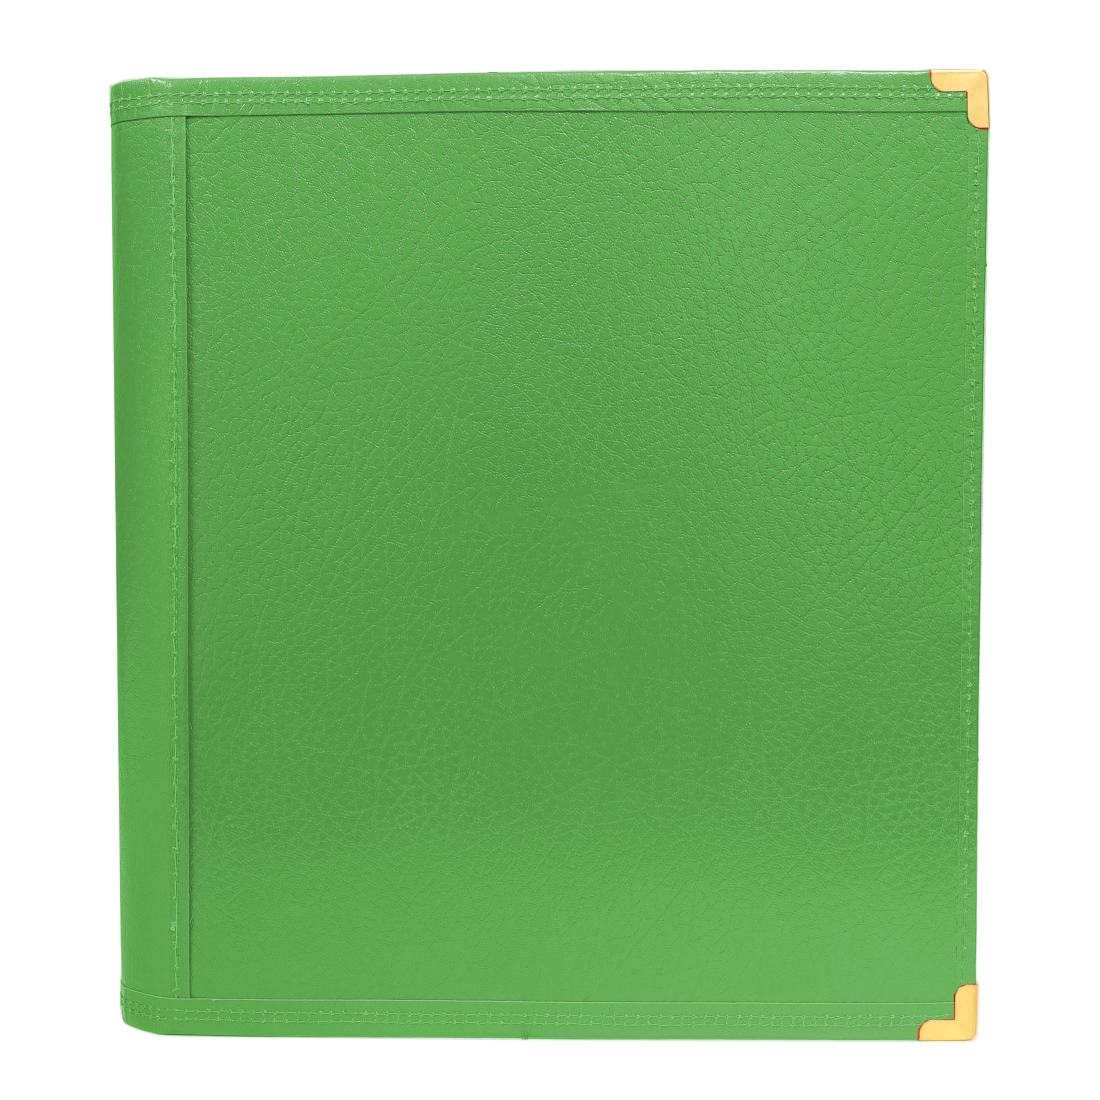 Deluxe Band Folder with Pencil Pockets (Green)